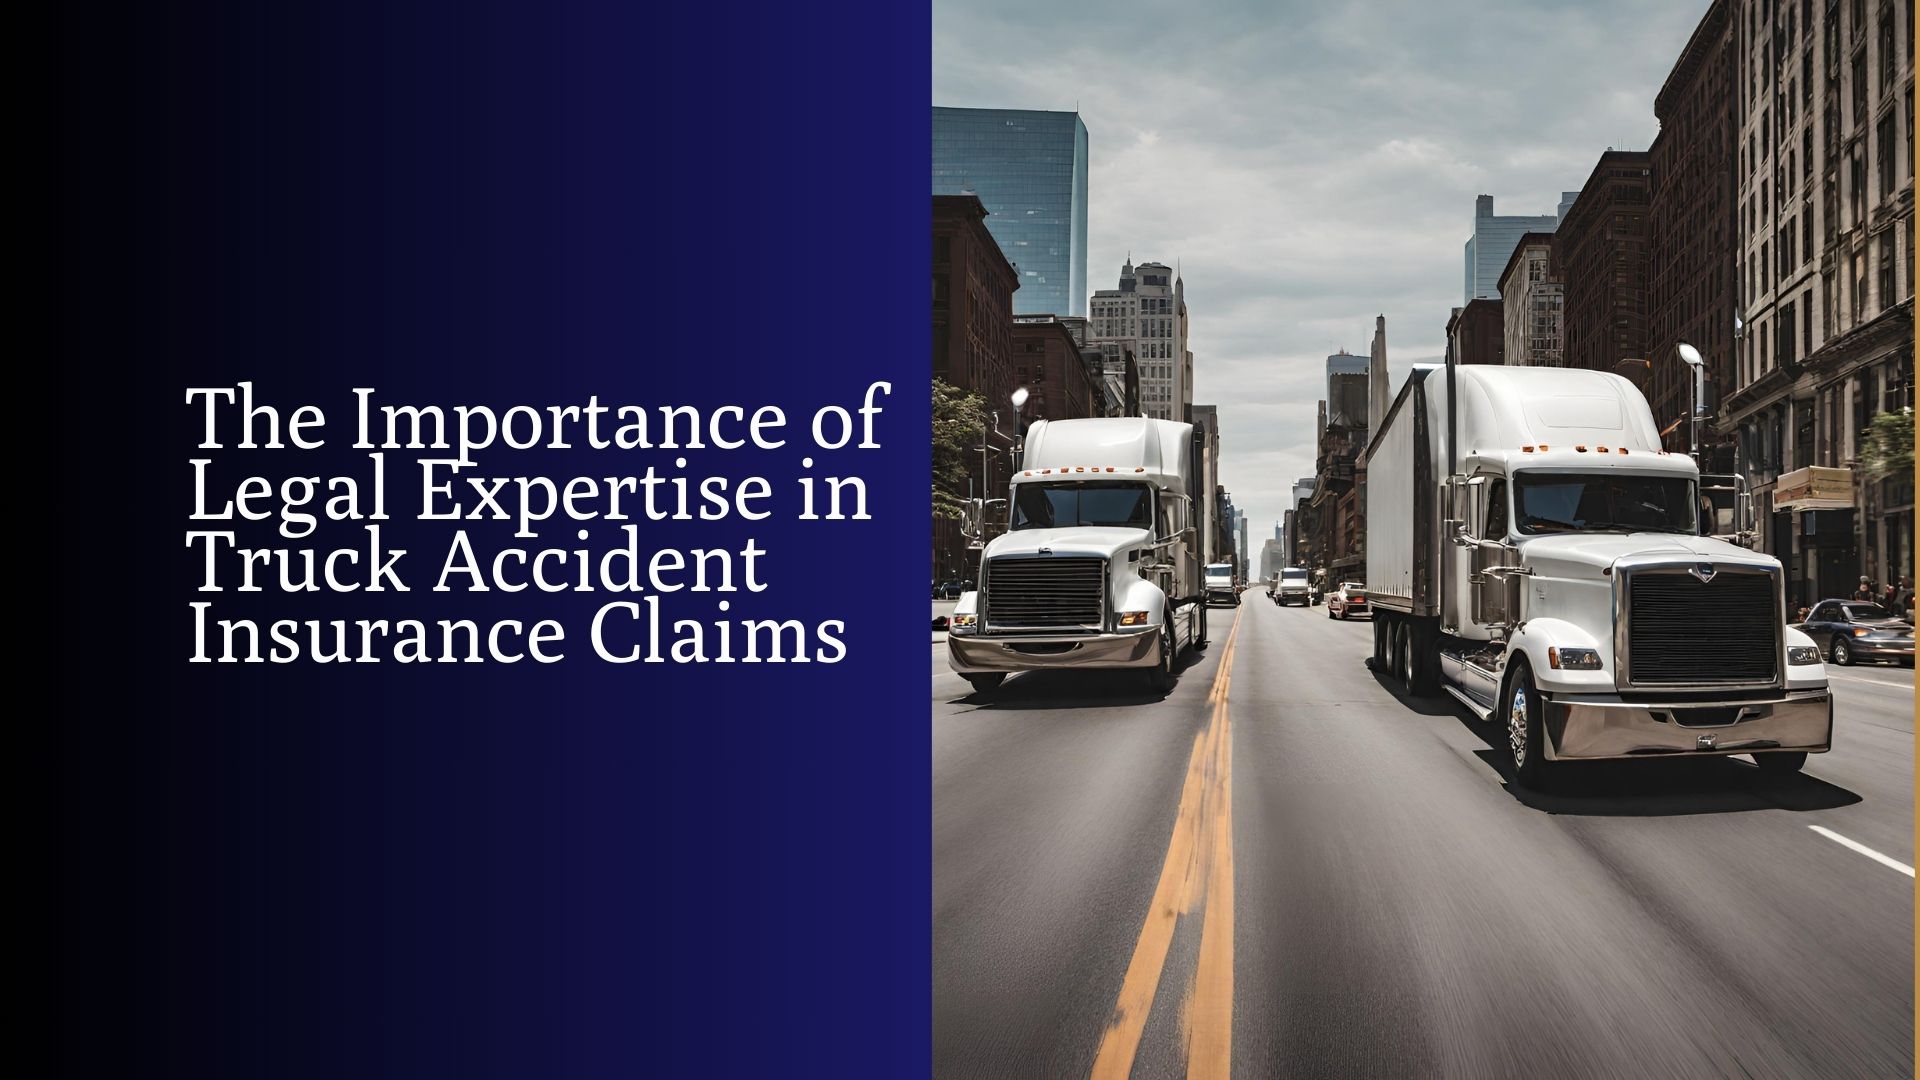 Attorney-Accident-Truck-The-Importance-of-Legal-Expertise-in-Truck-Accident-Insurance-Claims 